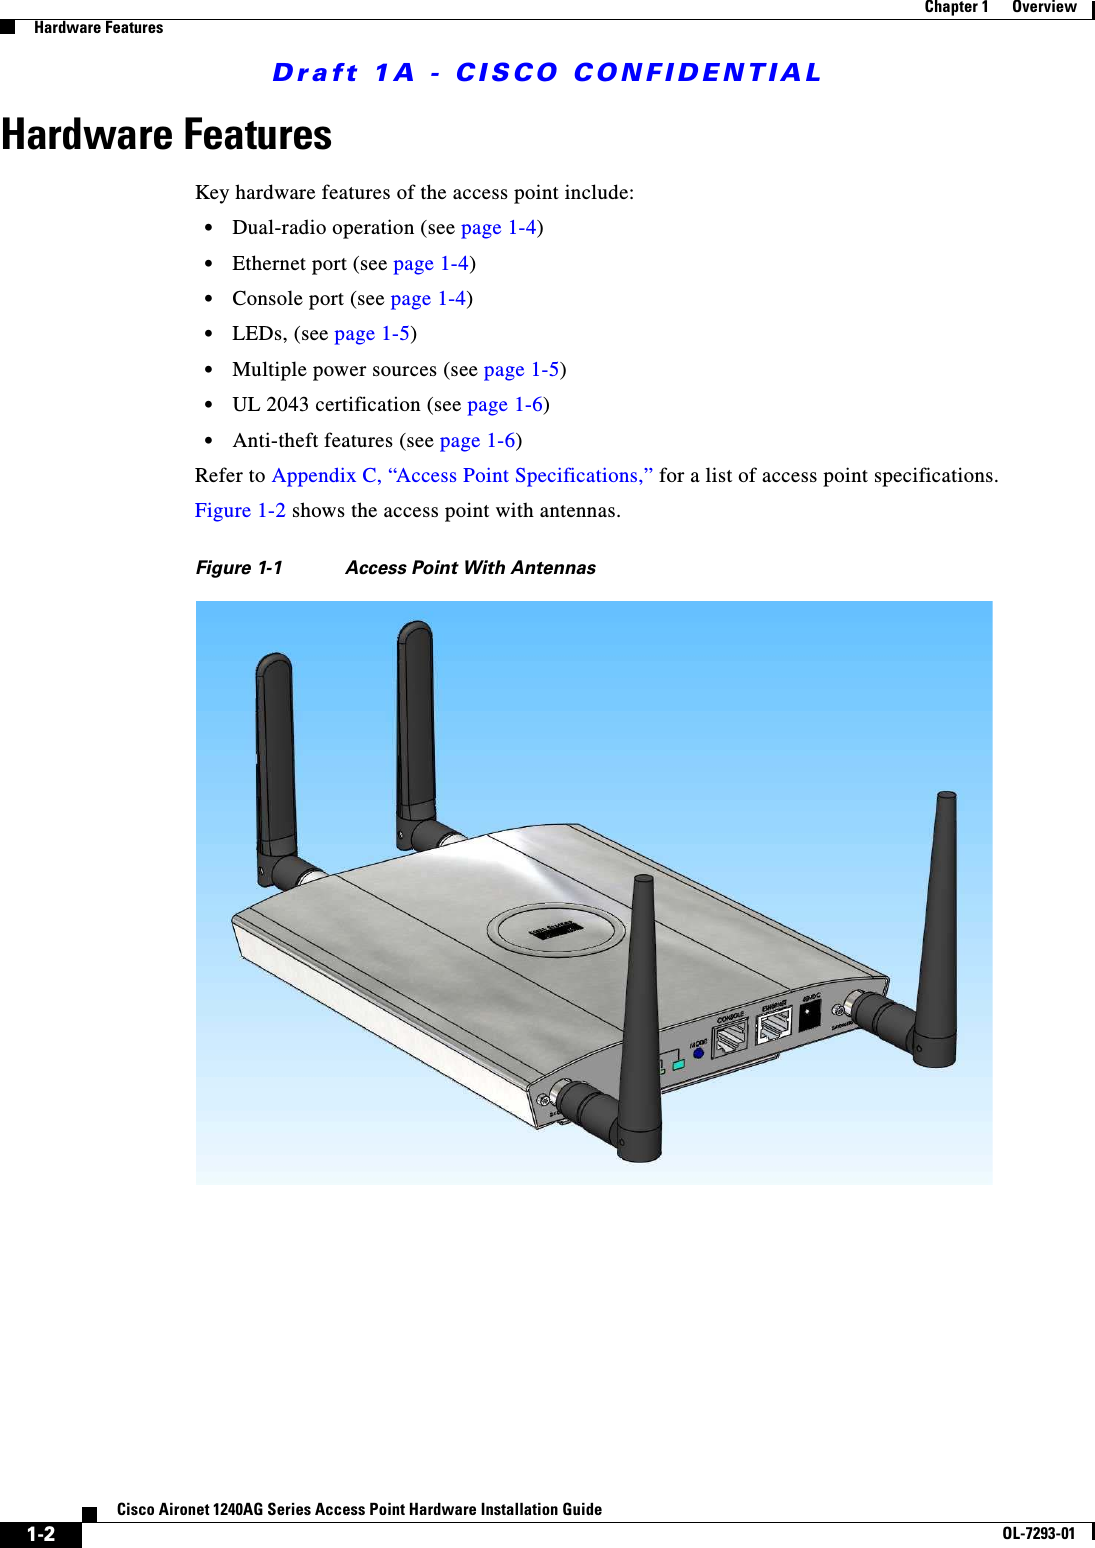 Draft 1A - CISCO CONFIDENTIAL1-2Cisco Aironet 1240AG Series Access Point Hardware Installation GuideOL-7293-01Chapter 1      OverviewHardware FeaturesHardware FeaturesKey hardware features of the access point include:•Dual-radio operation (see page 1-4)•Ethernet port (see page 1-4)•Console port (see page 1-4)•LEDs, (see page 1-5)•Multiple power sources (see page 1-5)•UL 2043 certification (see page 1-6)•Anti-theft features (see page 1-6) Refer to Appendix C, “Access Point Specifications,” for a list of access point specifications.Figure 1-2 shows the access point with antennas.Figure 1-1 Access Point With Antennas